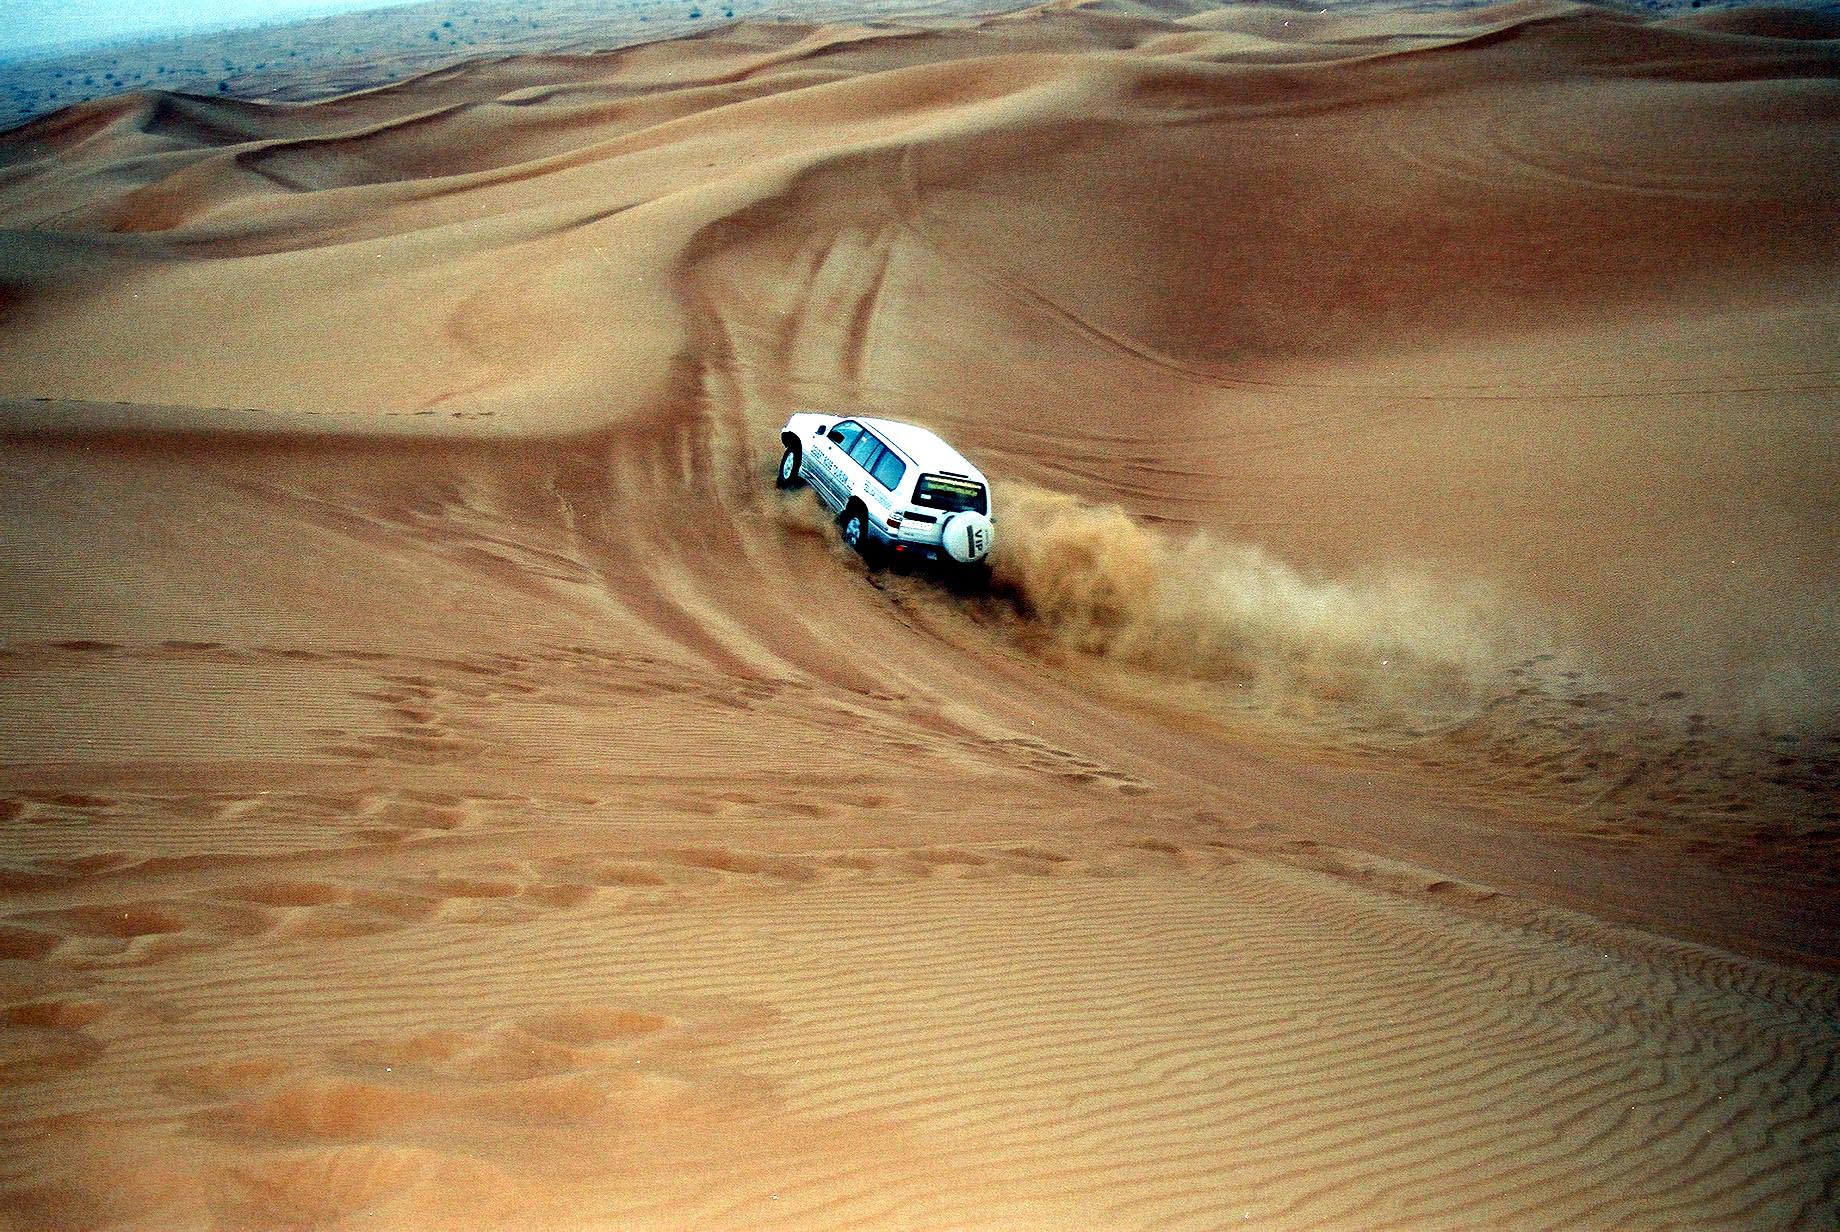 Neogitating dunes, the land cruisers are really good at it